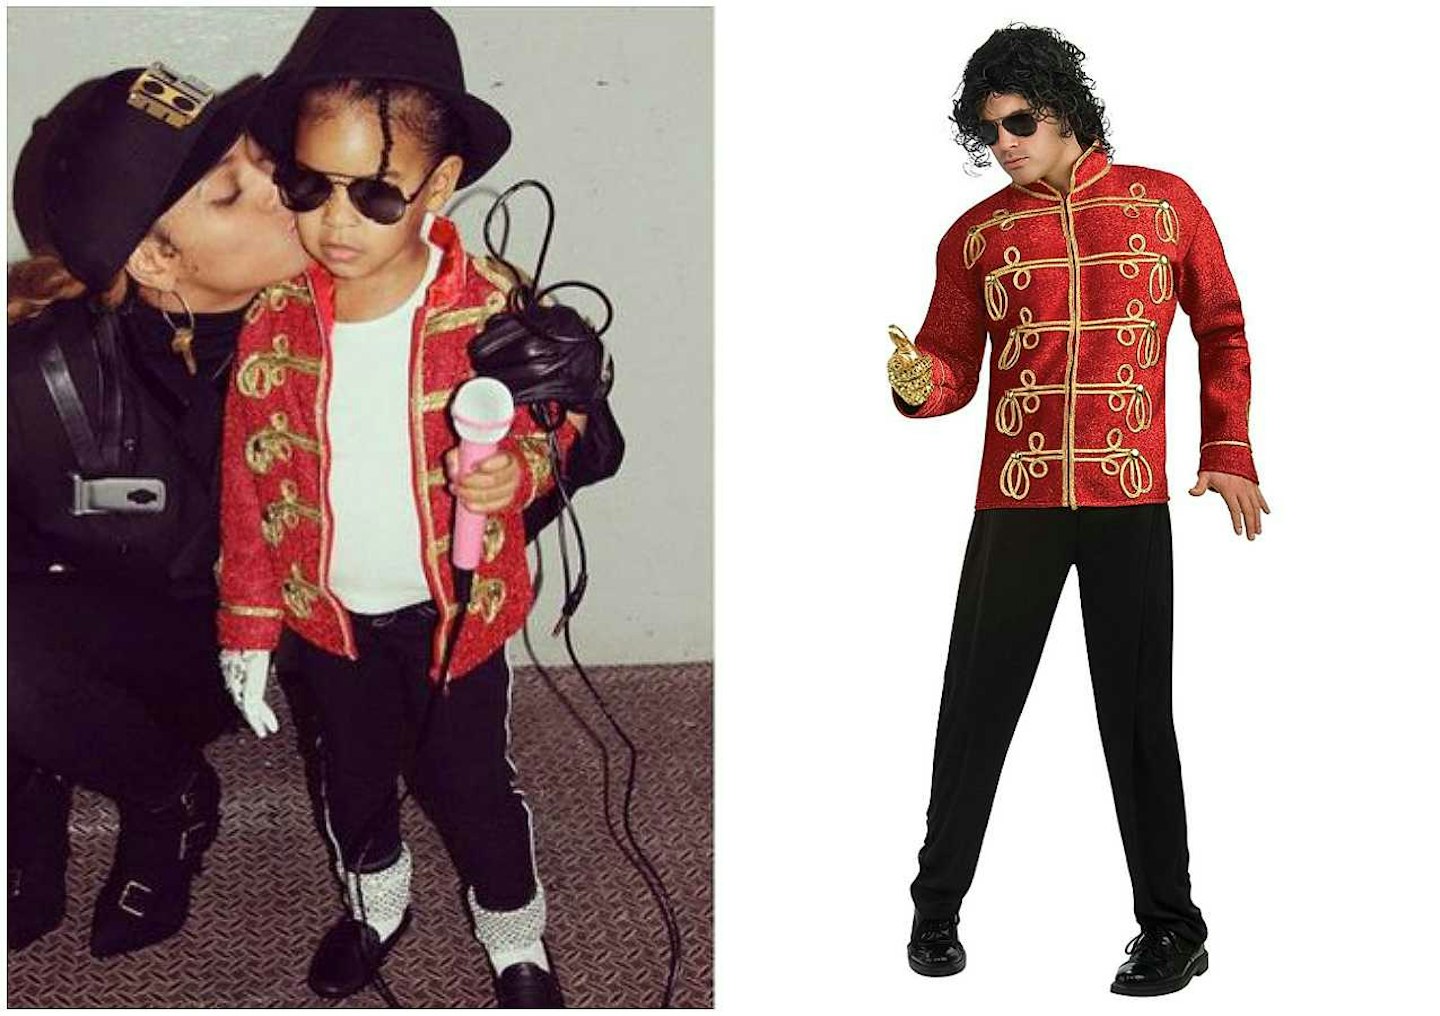 Blue Ivy as Michael Jackson at the 11th Annual American Music Awards